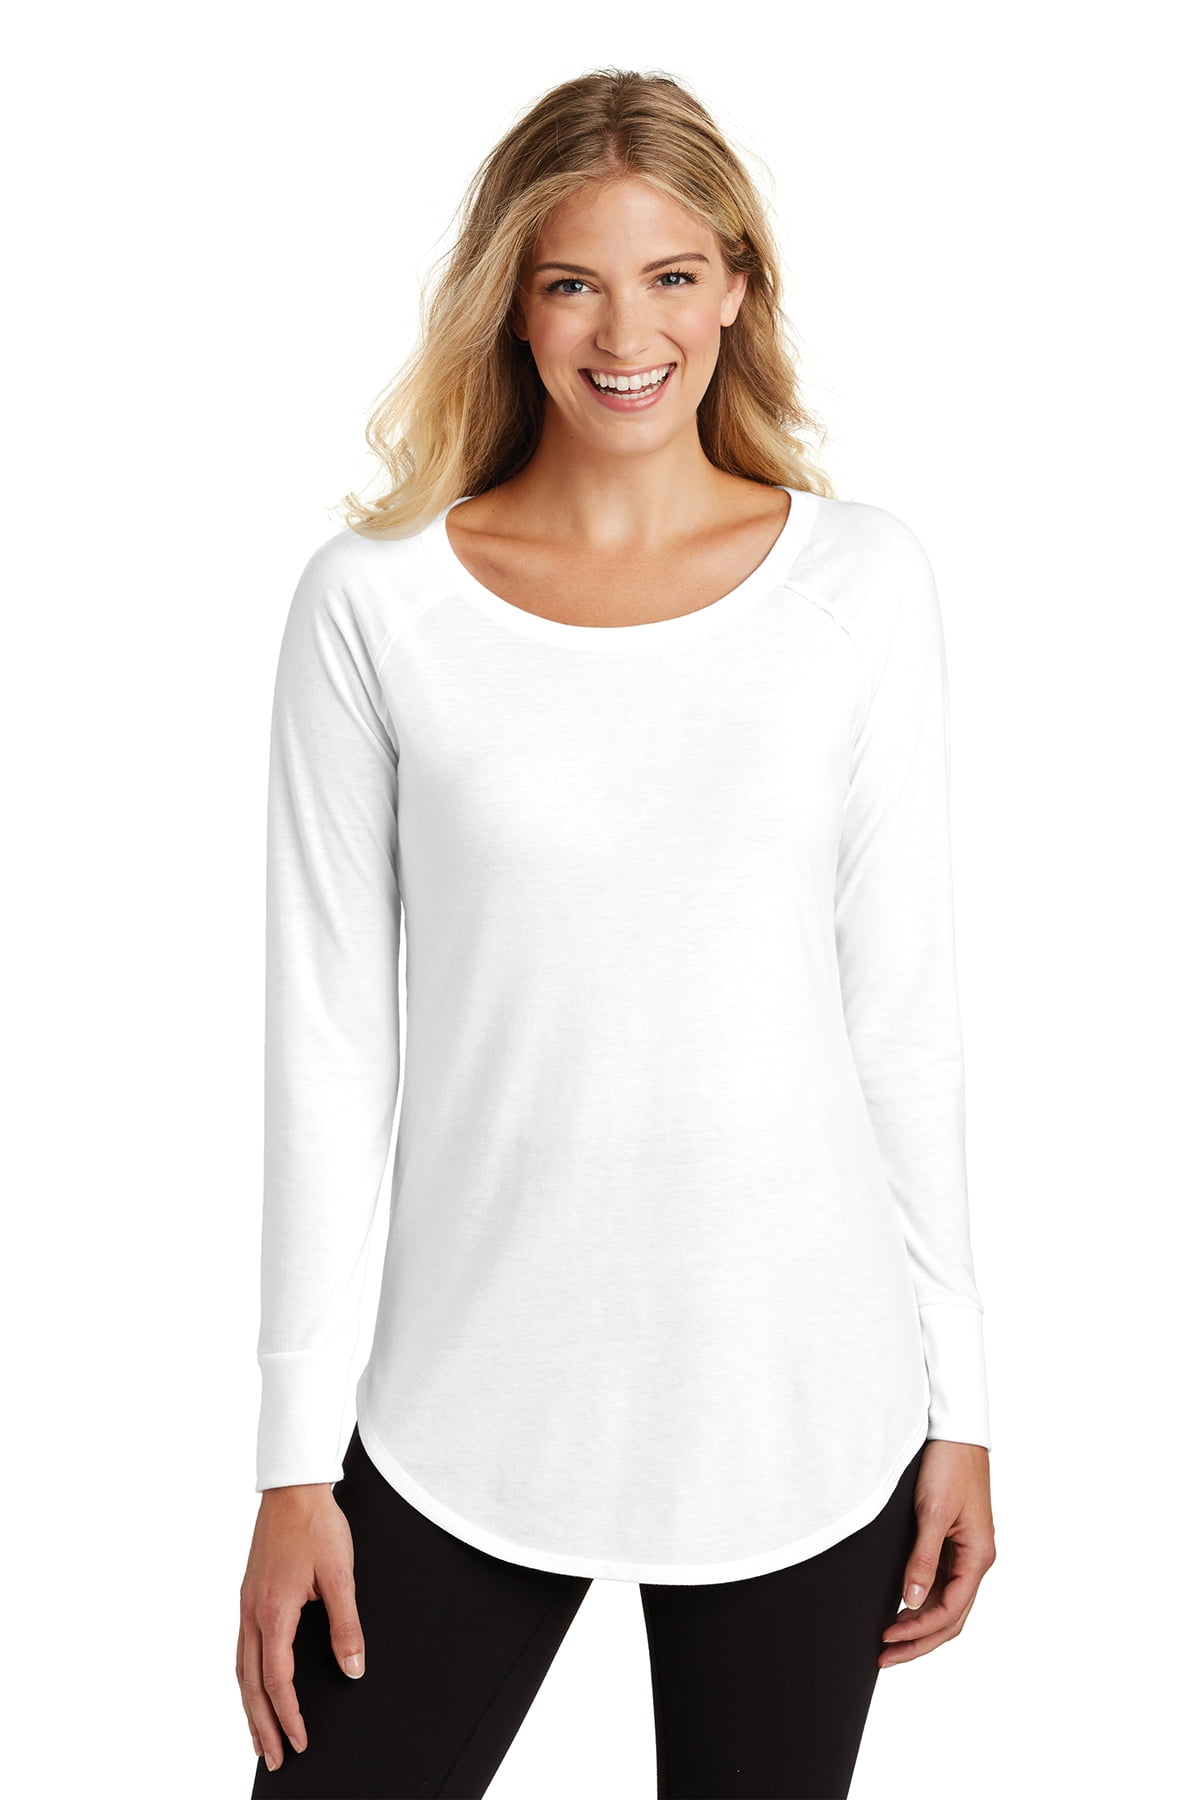 District Women's Perfect Tri Long Sleeve Tunic Tee Dt132l - White - S